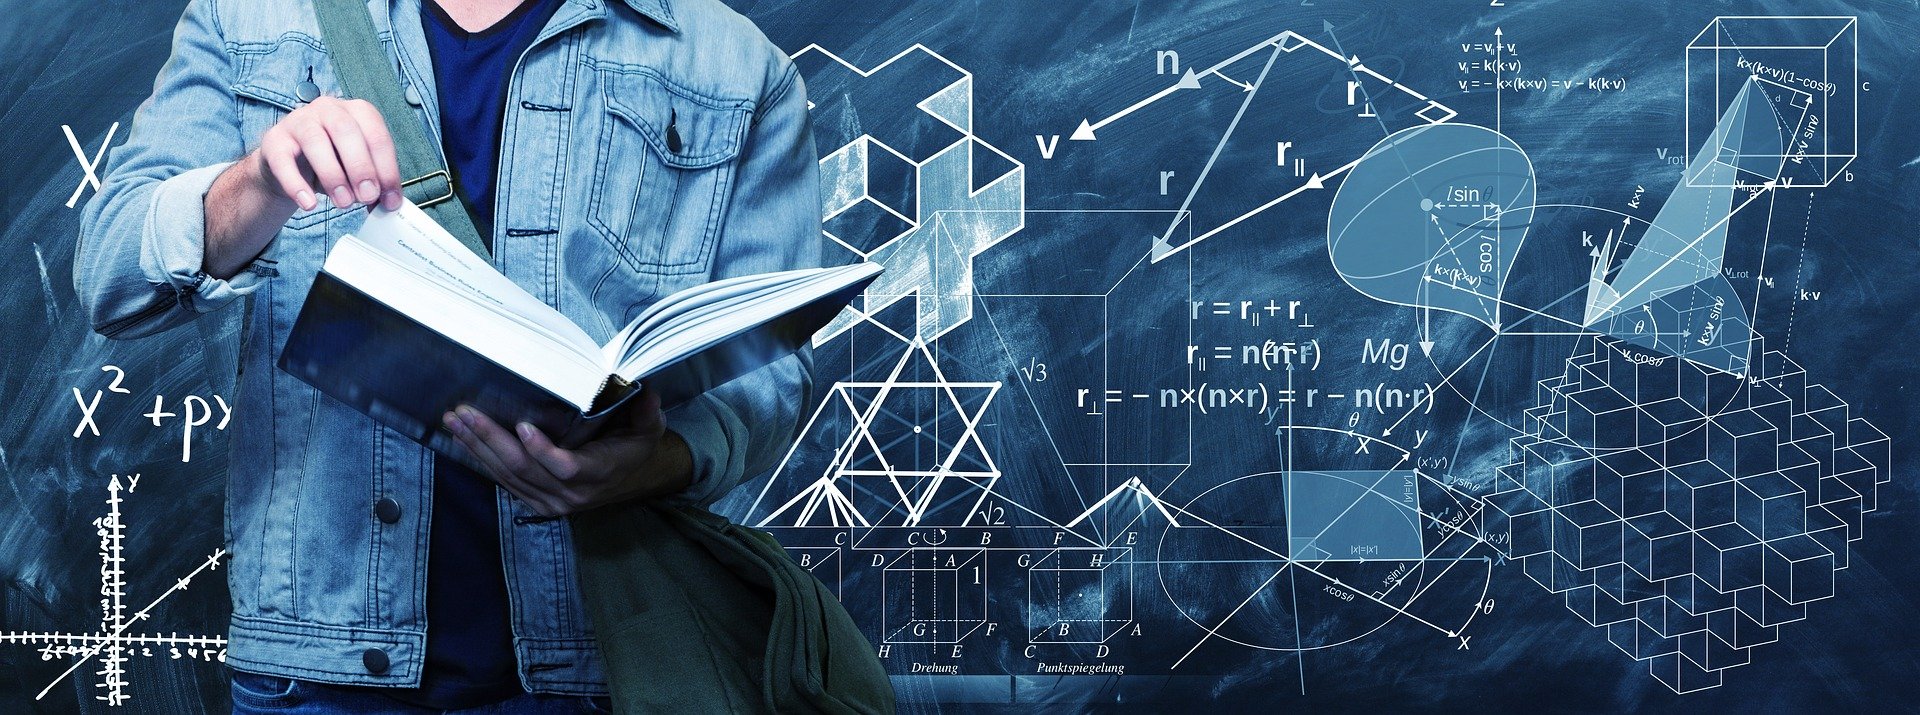 Image of a teacher looking at a large book against a background of mathematical symbols.